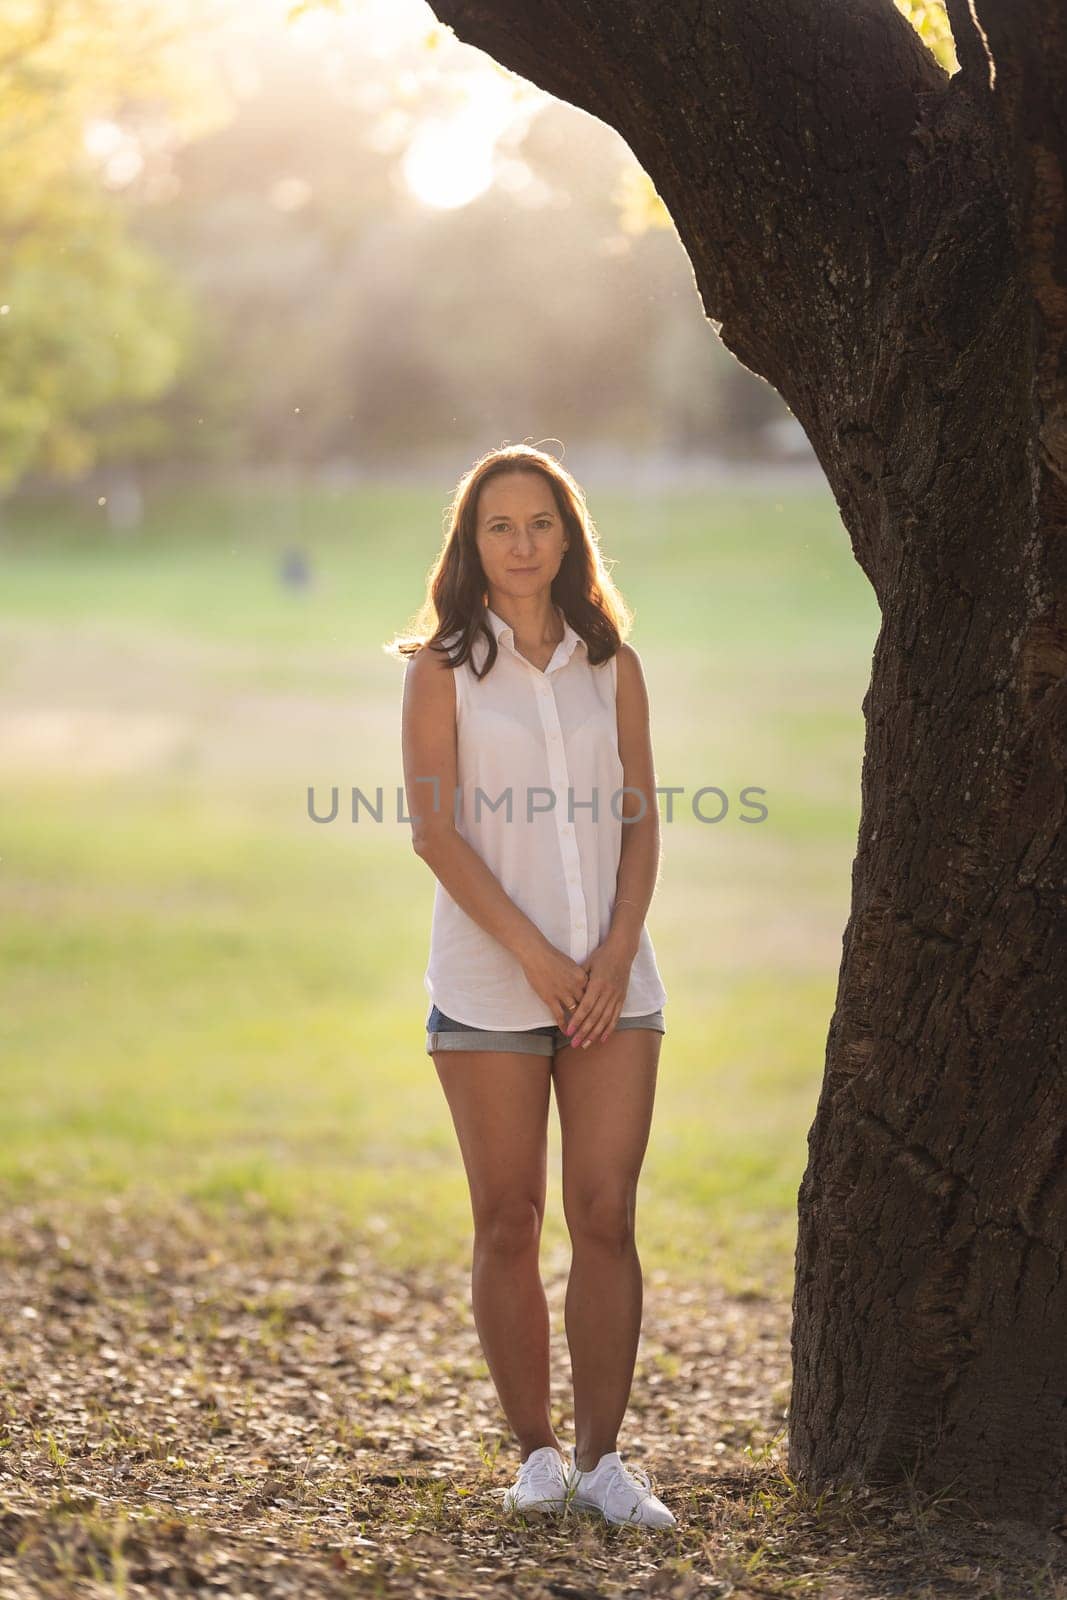 Adult white woman with brown hair standing by tree trunk. Vertical shot